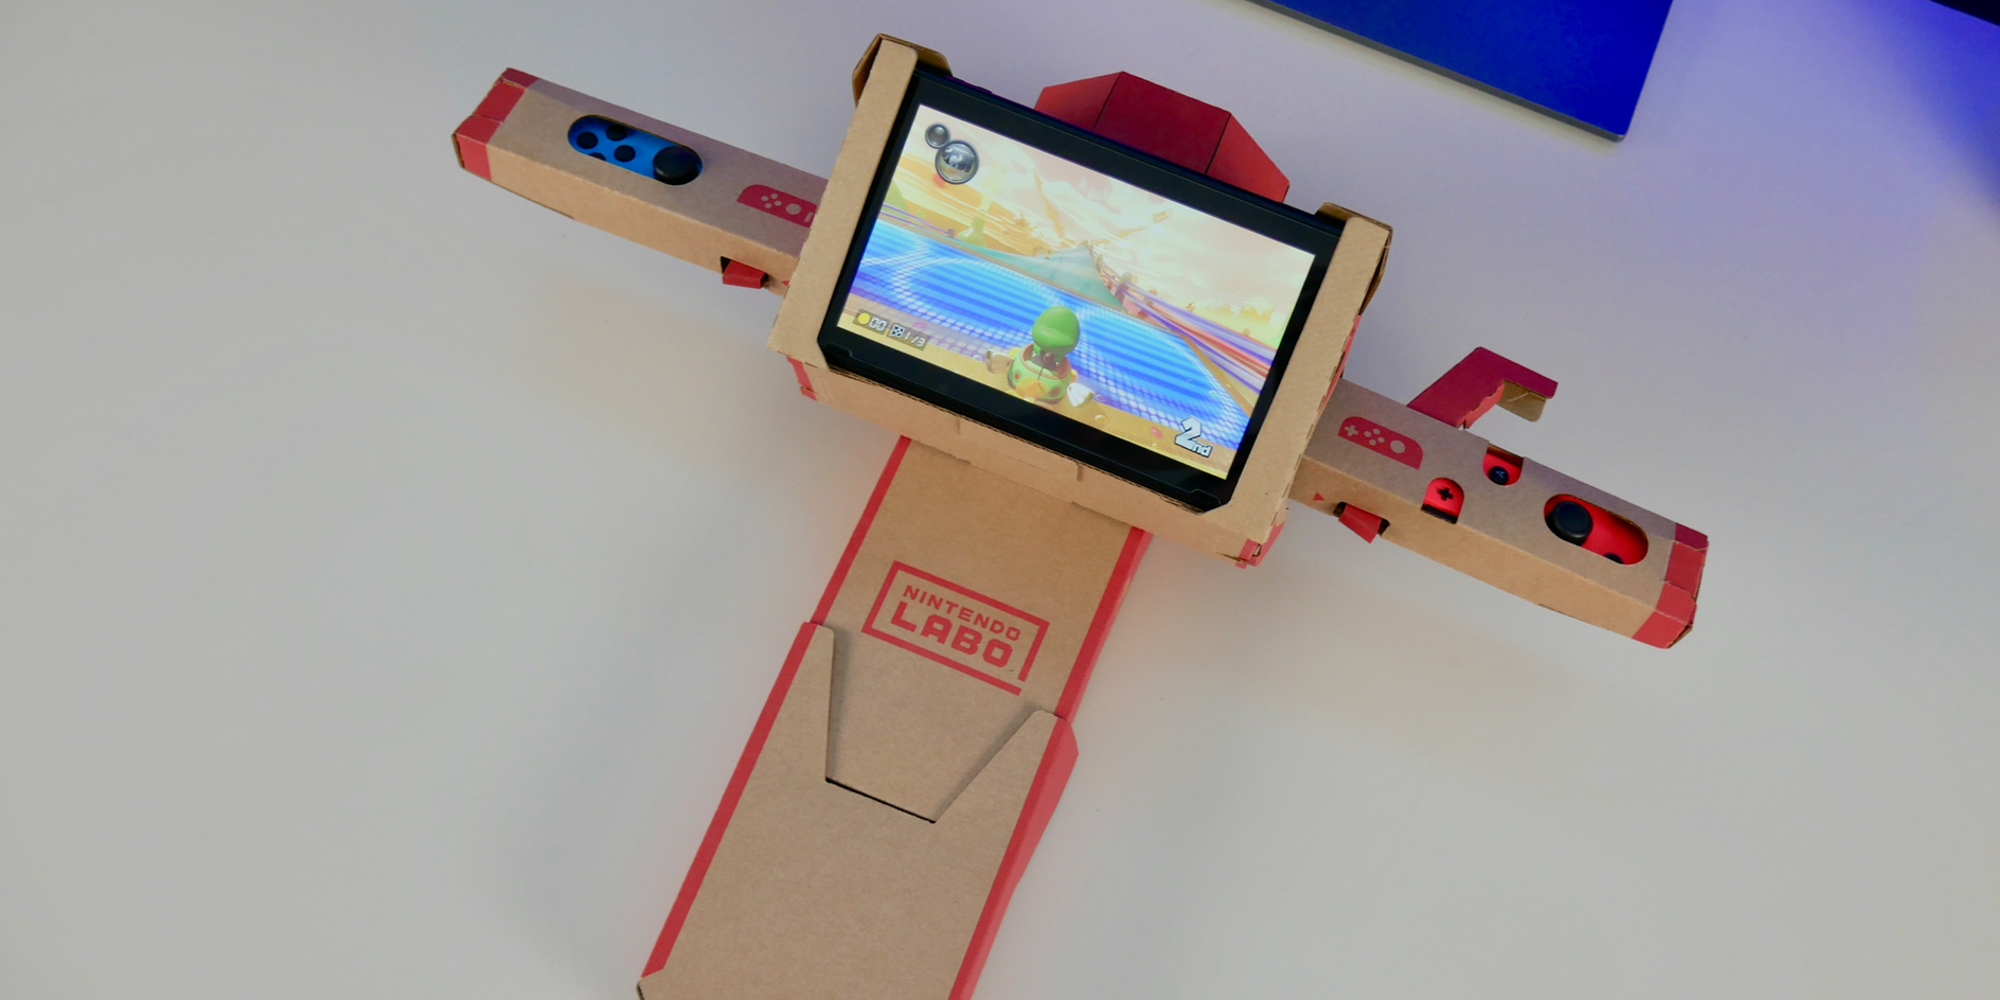 Hands-on: Mario Kart pairs perfectly with Nintendo Labo's cardboard accessories